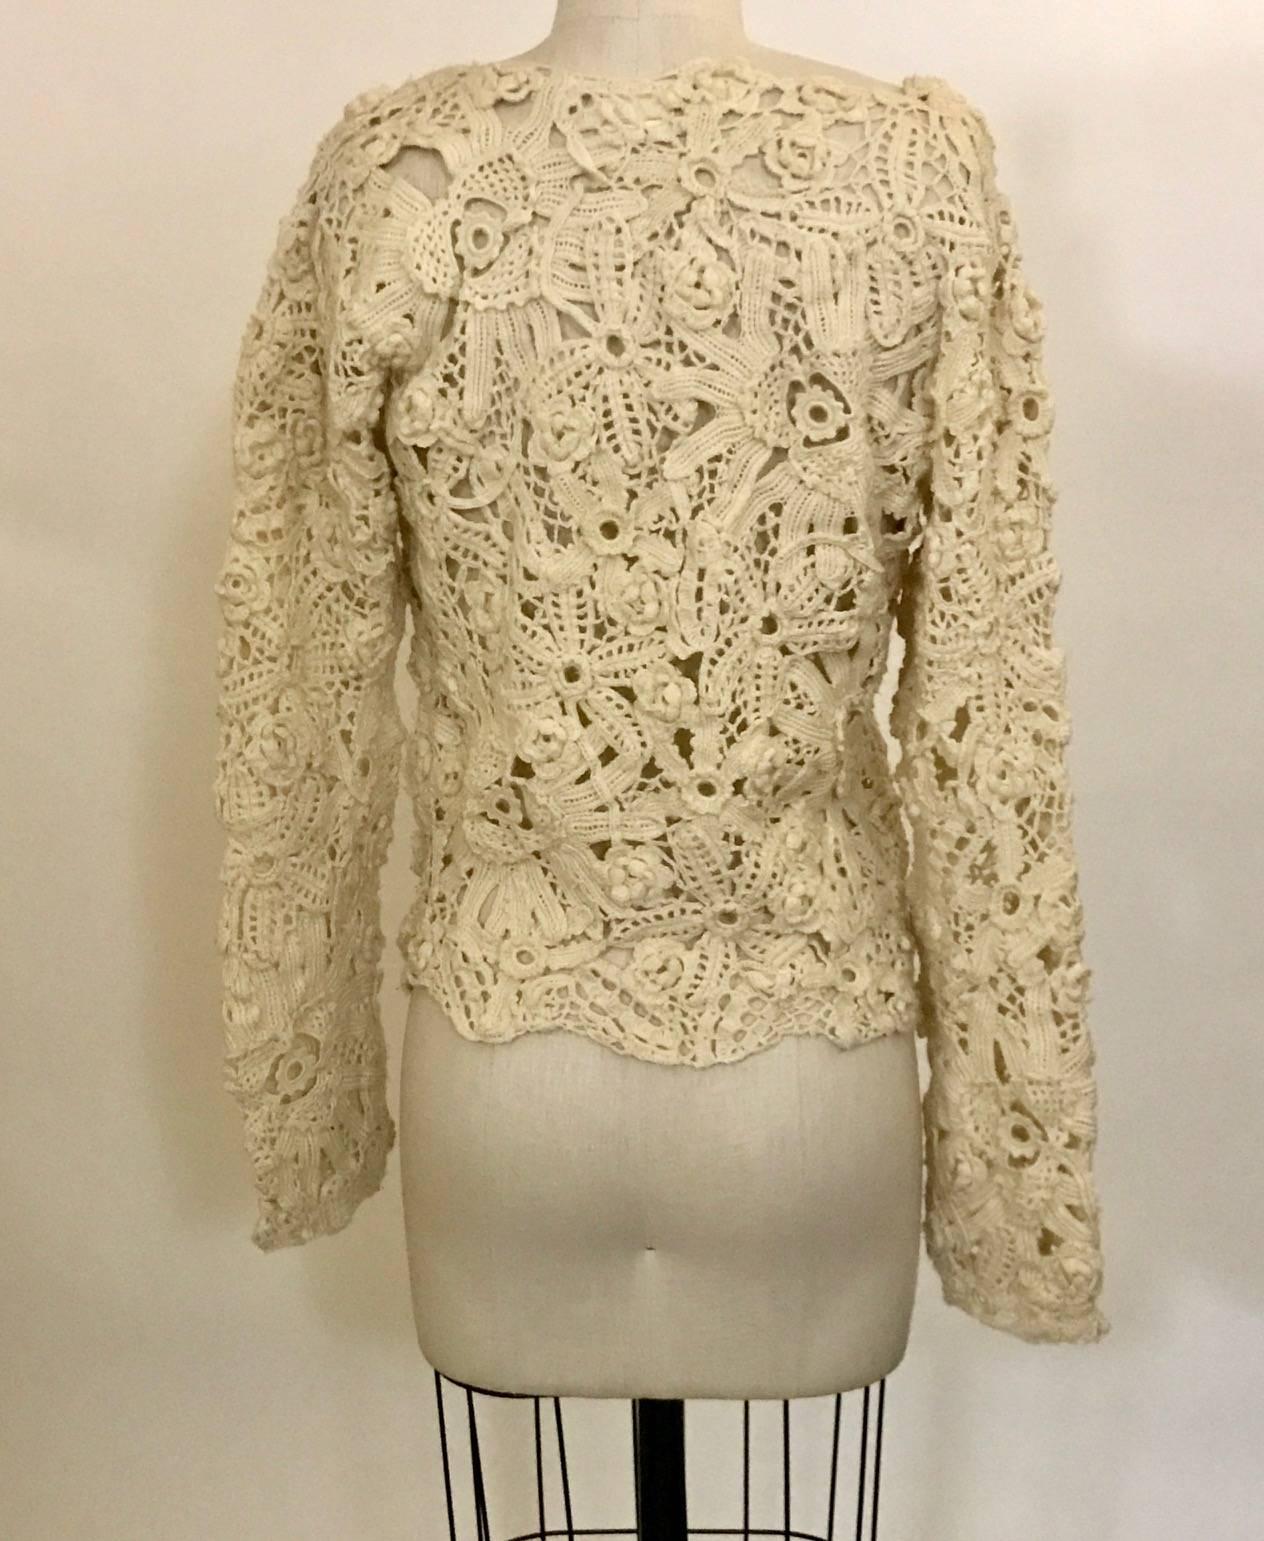 Comme des Garcons long sleeve floral crochet cream sweater. Open knit. Color best represented in close up of label.

No content label, feels like acrylic blend.

Made in China.

Size M. 
Bust 36